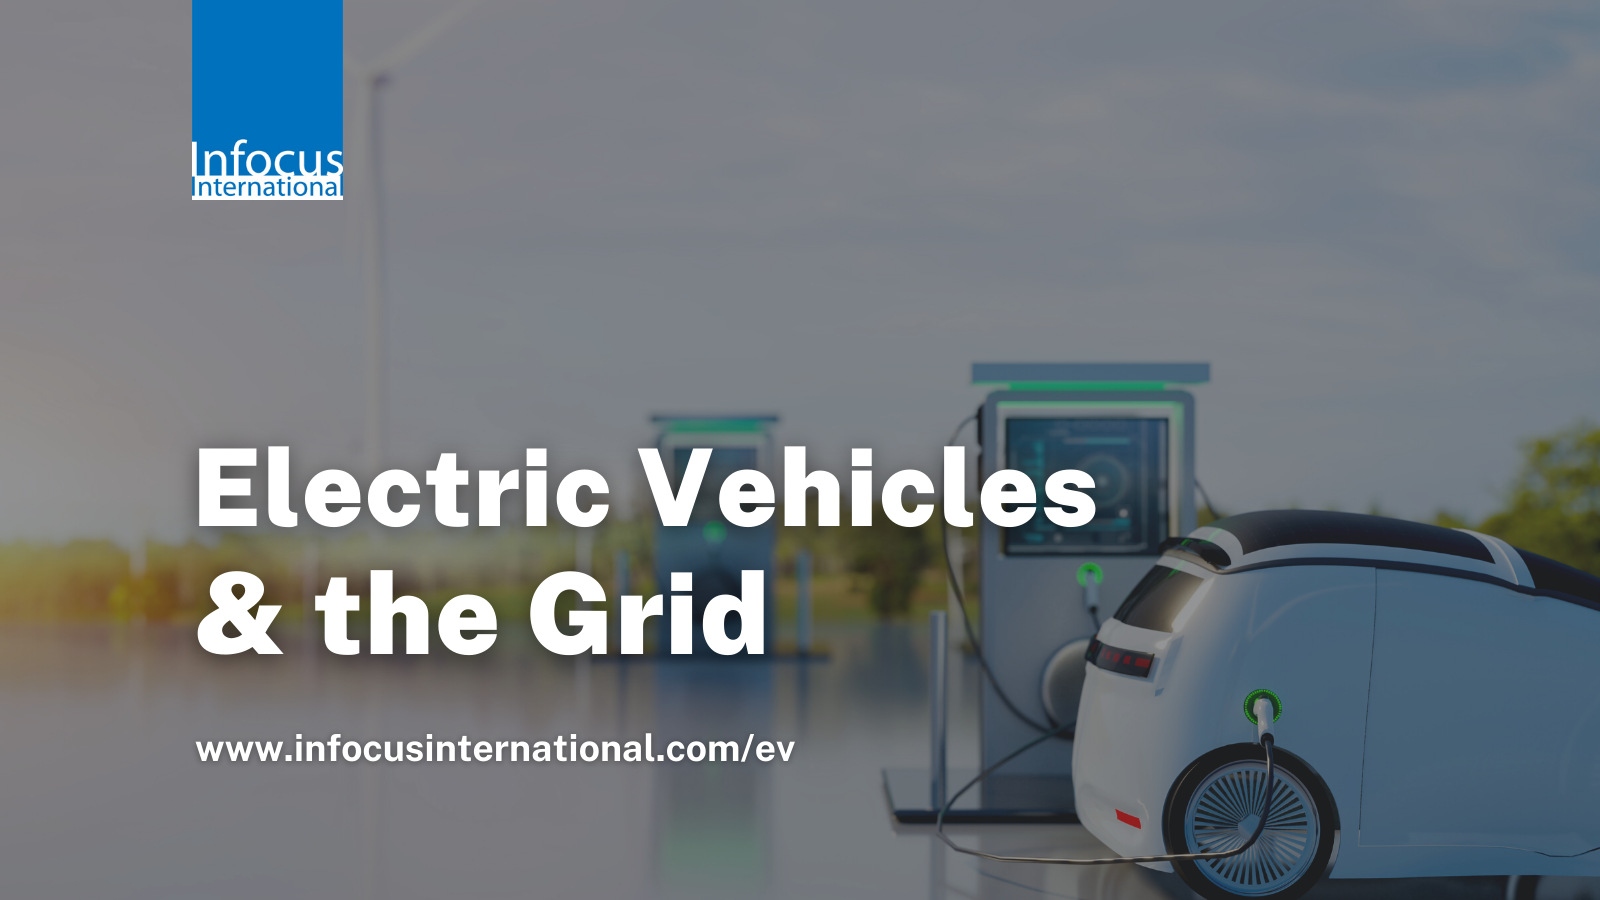 Electric Vehicles & the Grid